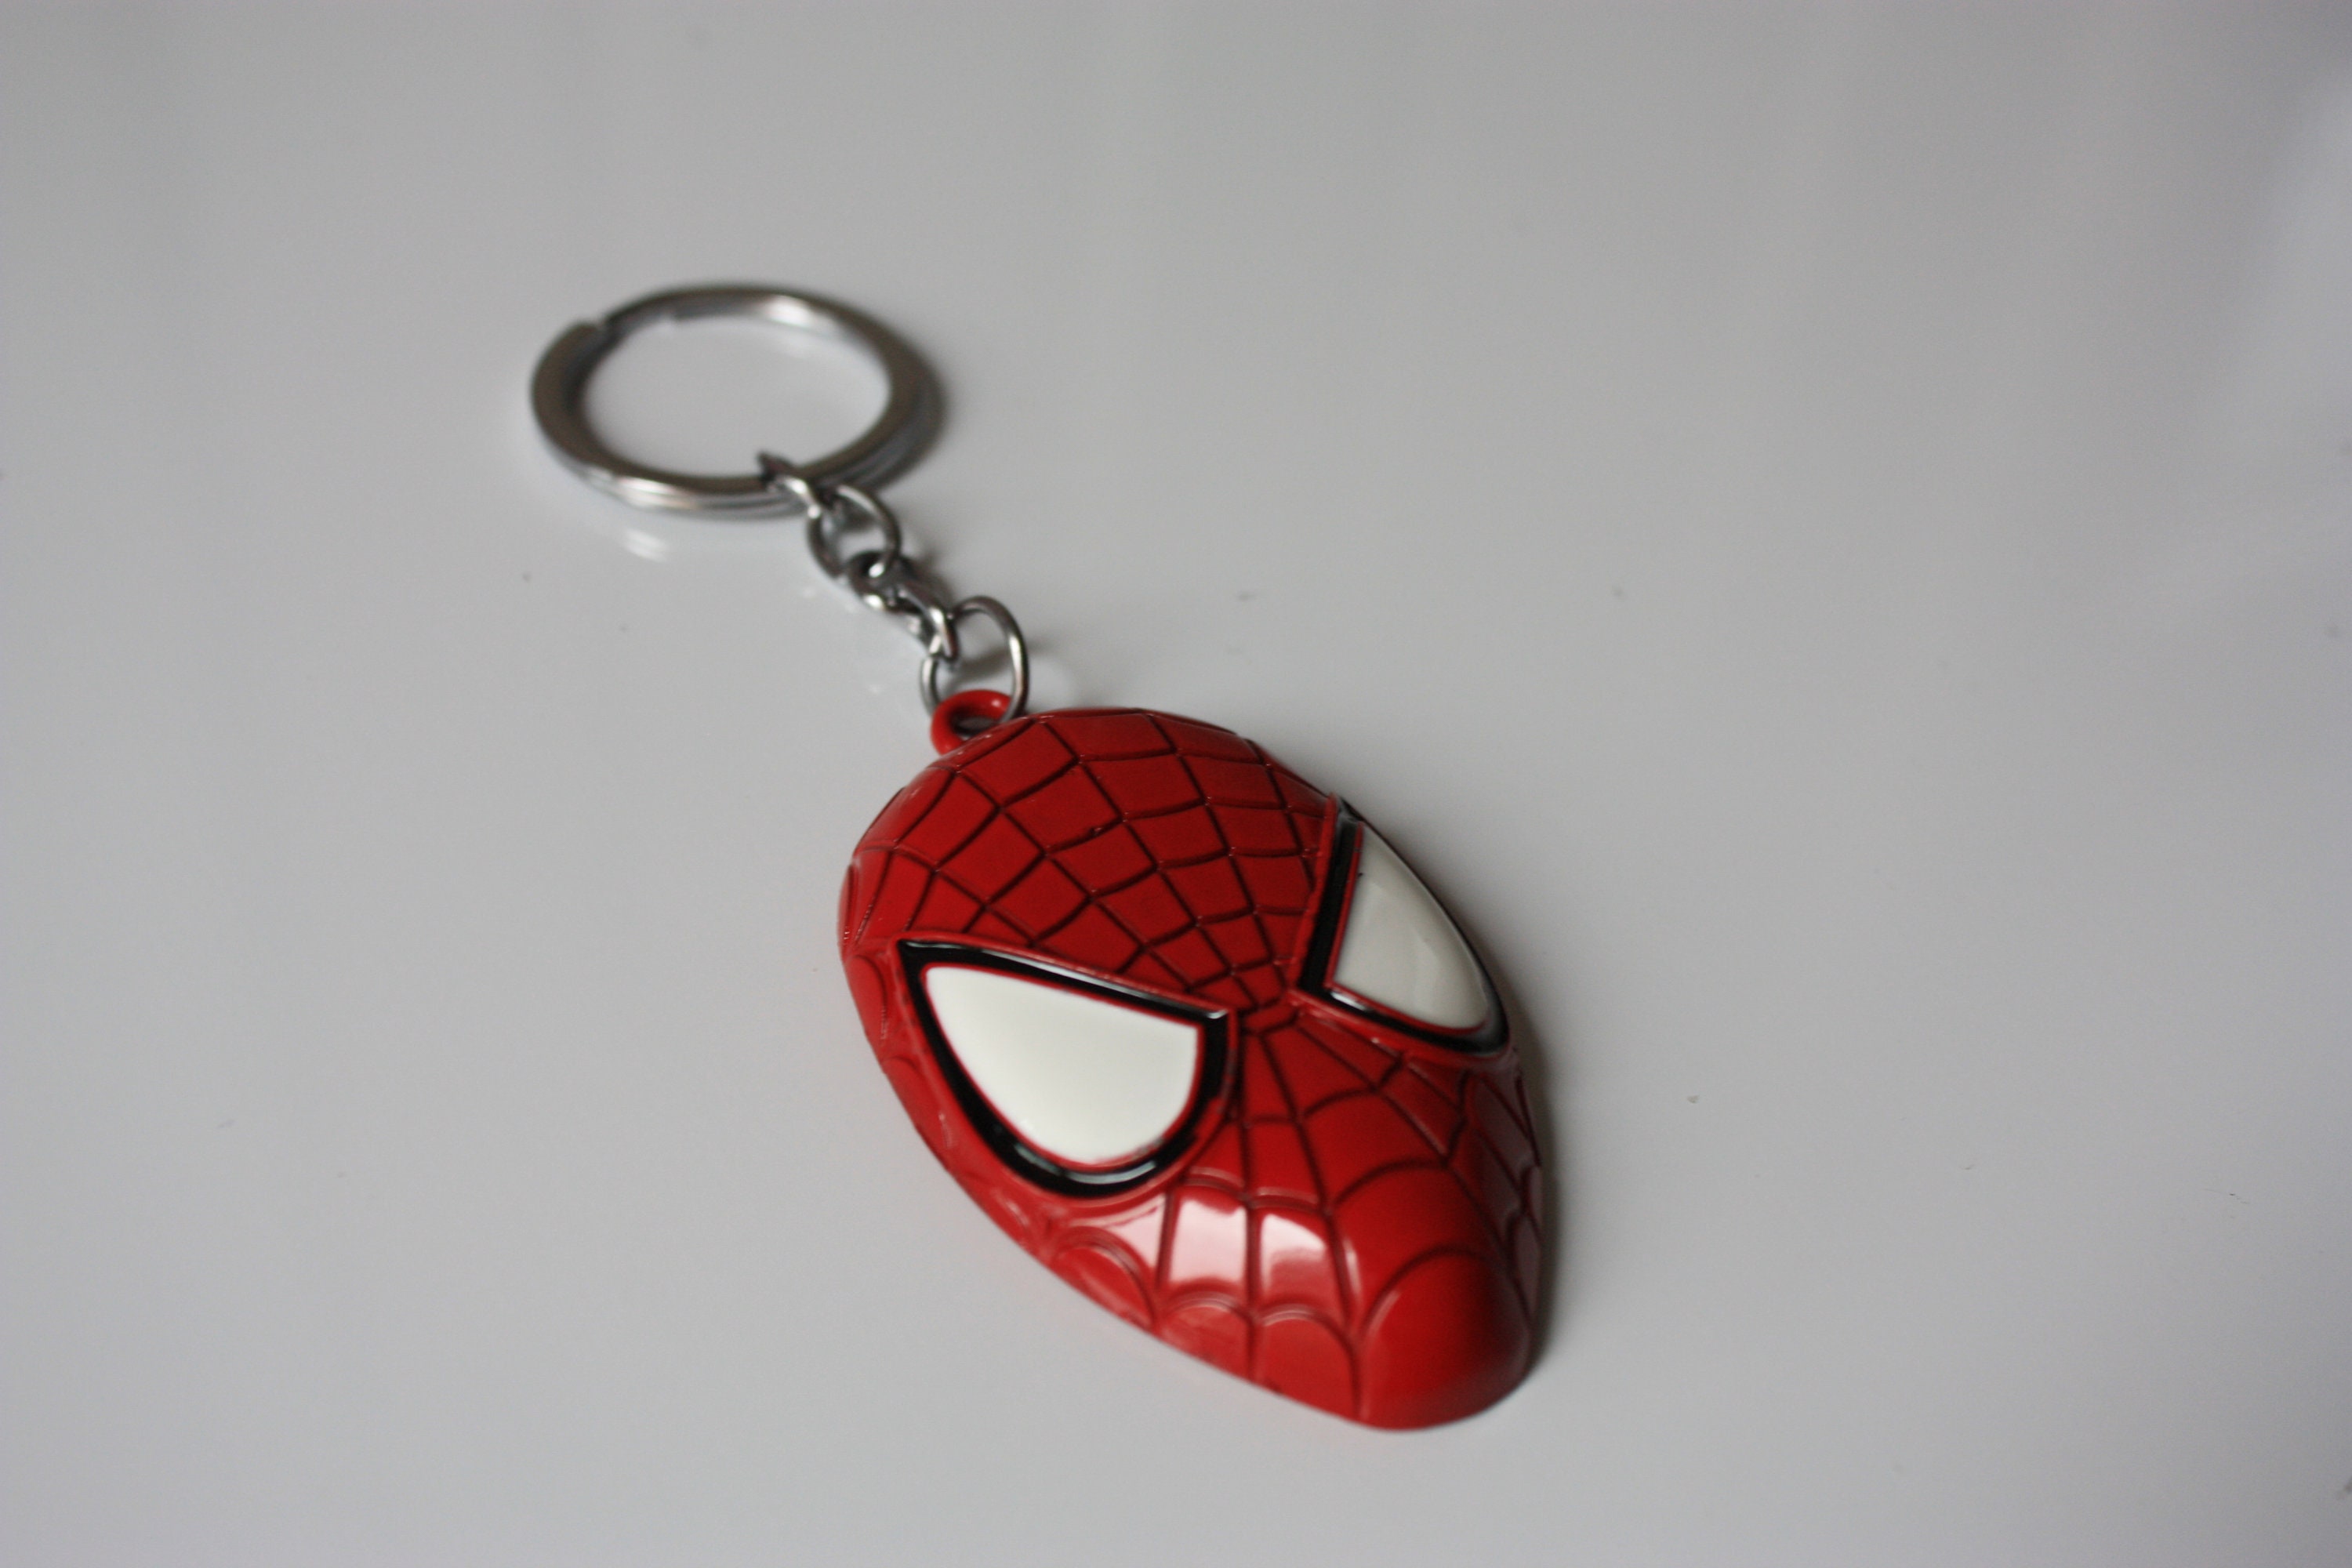 Marvel Spider-Man: Across The Spider-Verse Trifold Chain Wallet